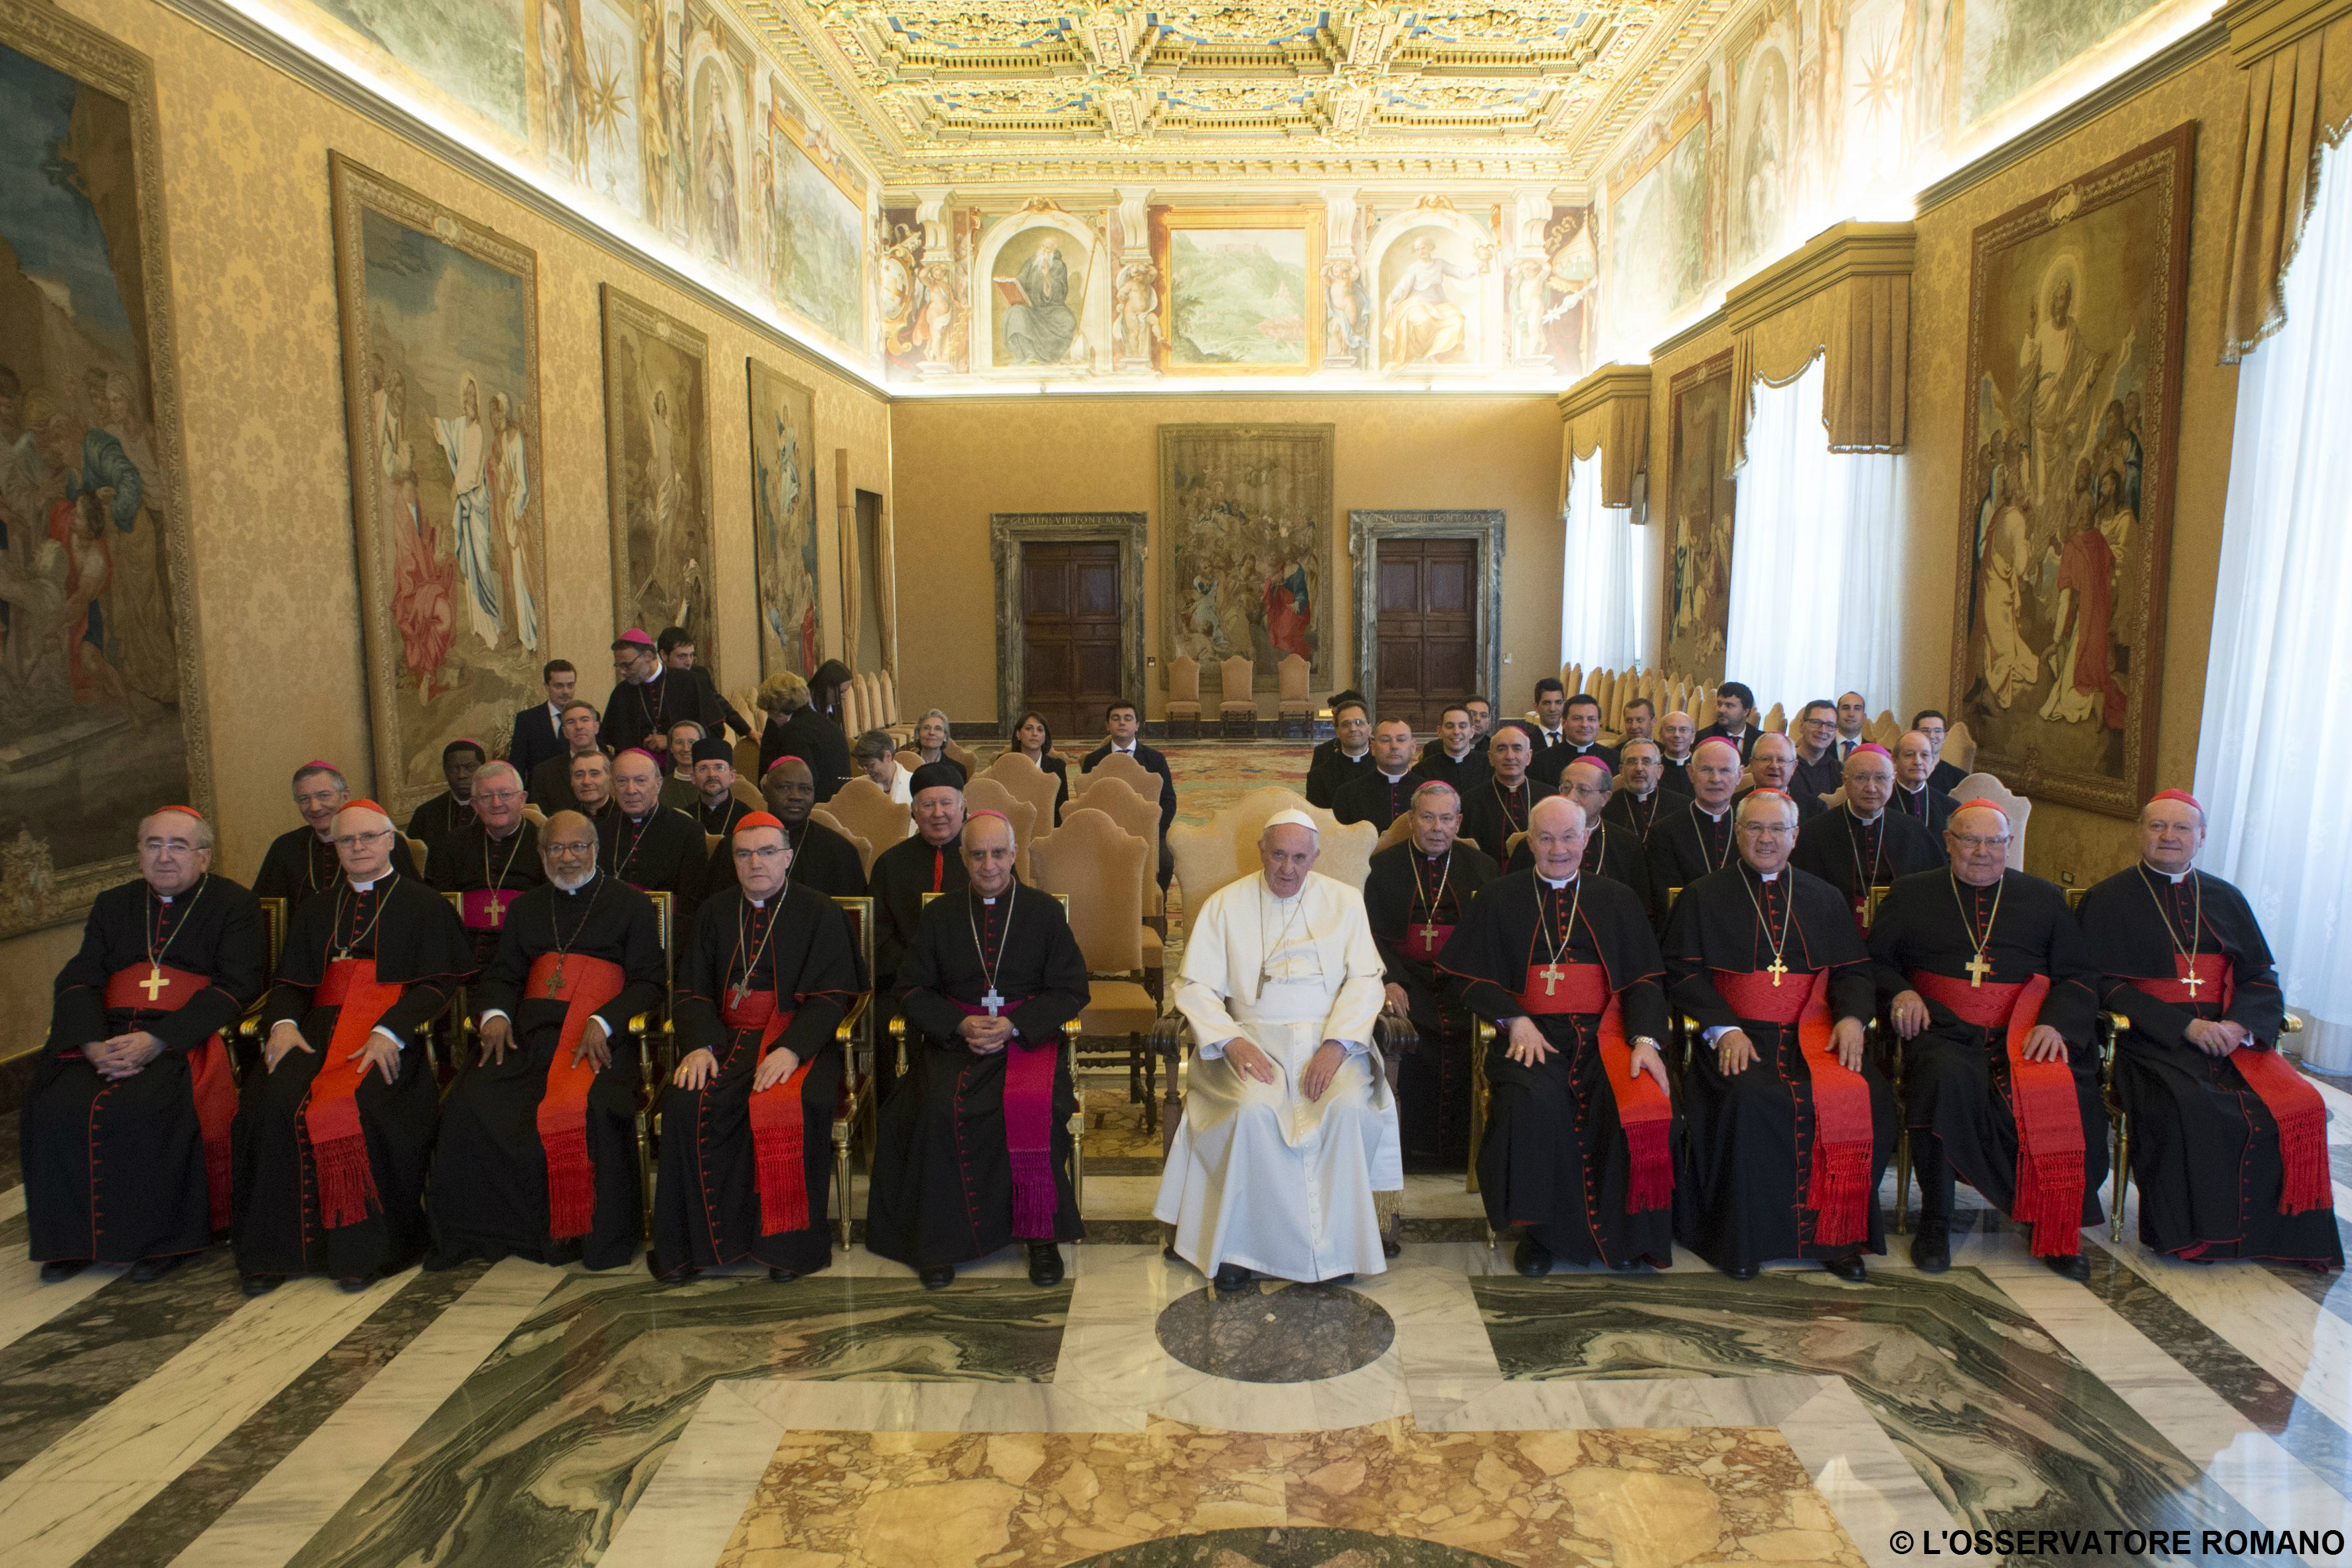 Pope Francis met today with participants of the Plenary Assembly of the Pontifical Council for Promoting the New Evangelization